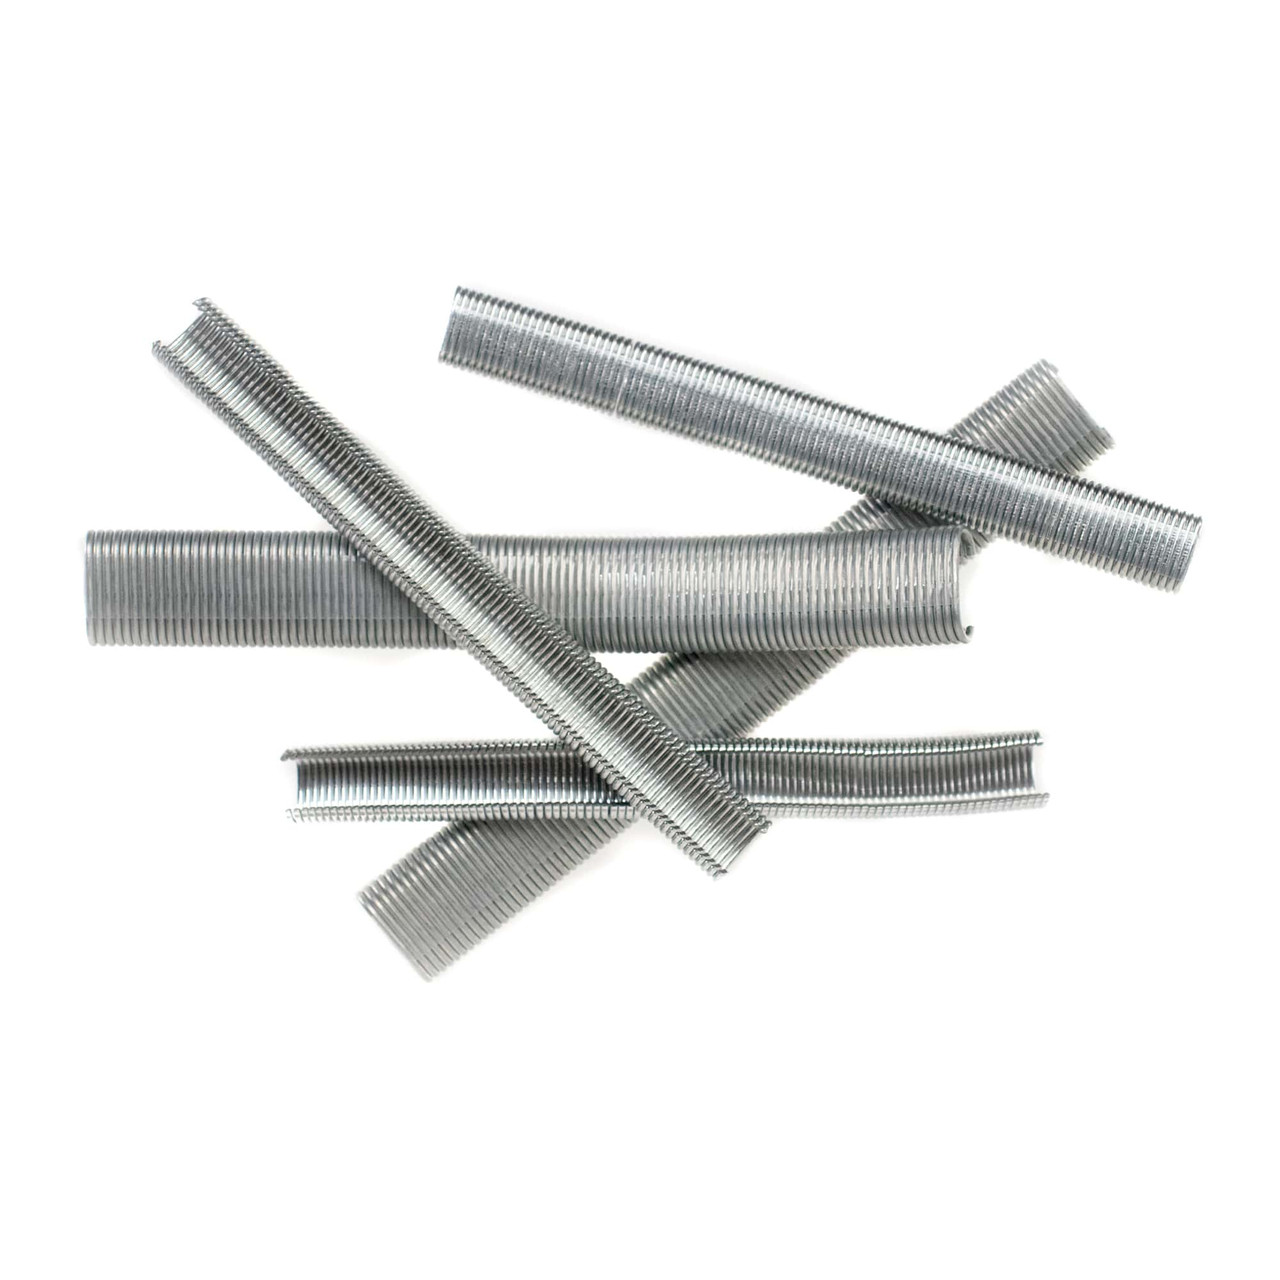 1200 Count 1-1/4-Inch x .090-Inch Ring Shank 304 Stainless Steel Siding Nails  15-Degree Collated Wire Coil Siding Nails for Cement Board Siding or  Fencing Applications - Amazon.com